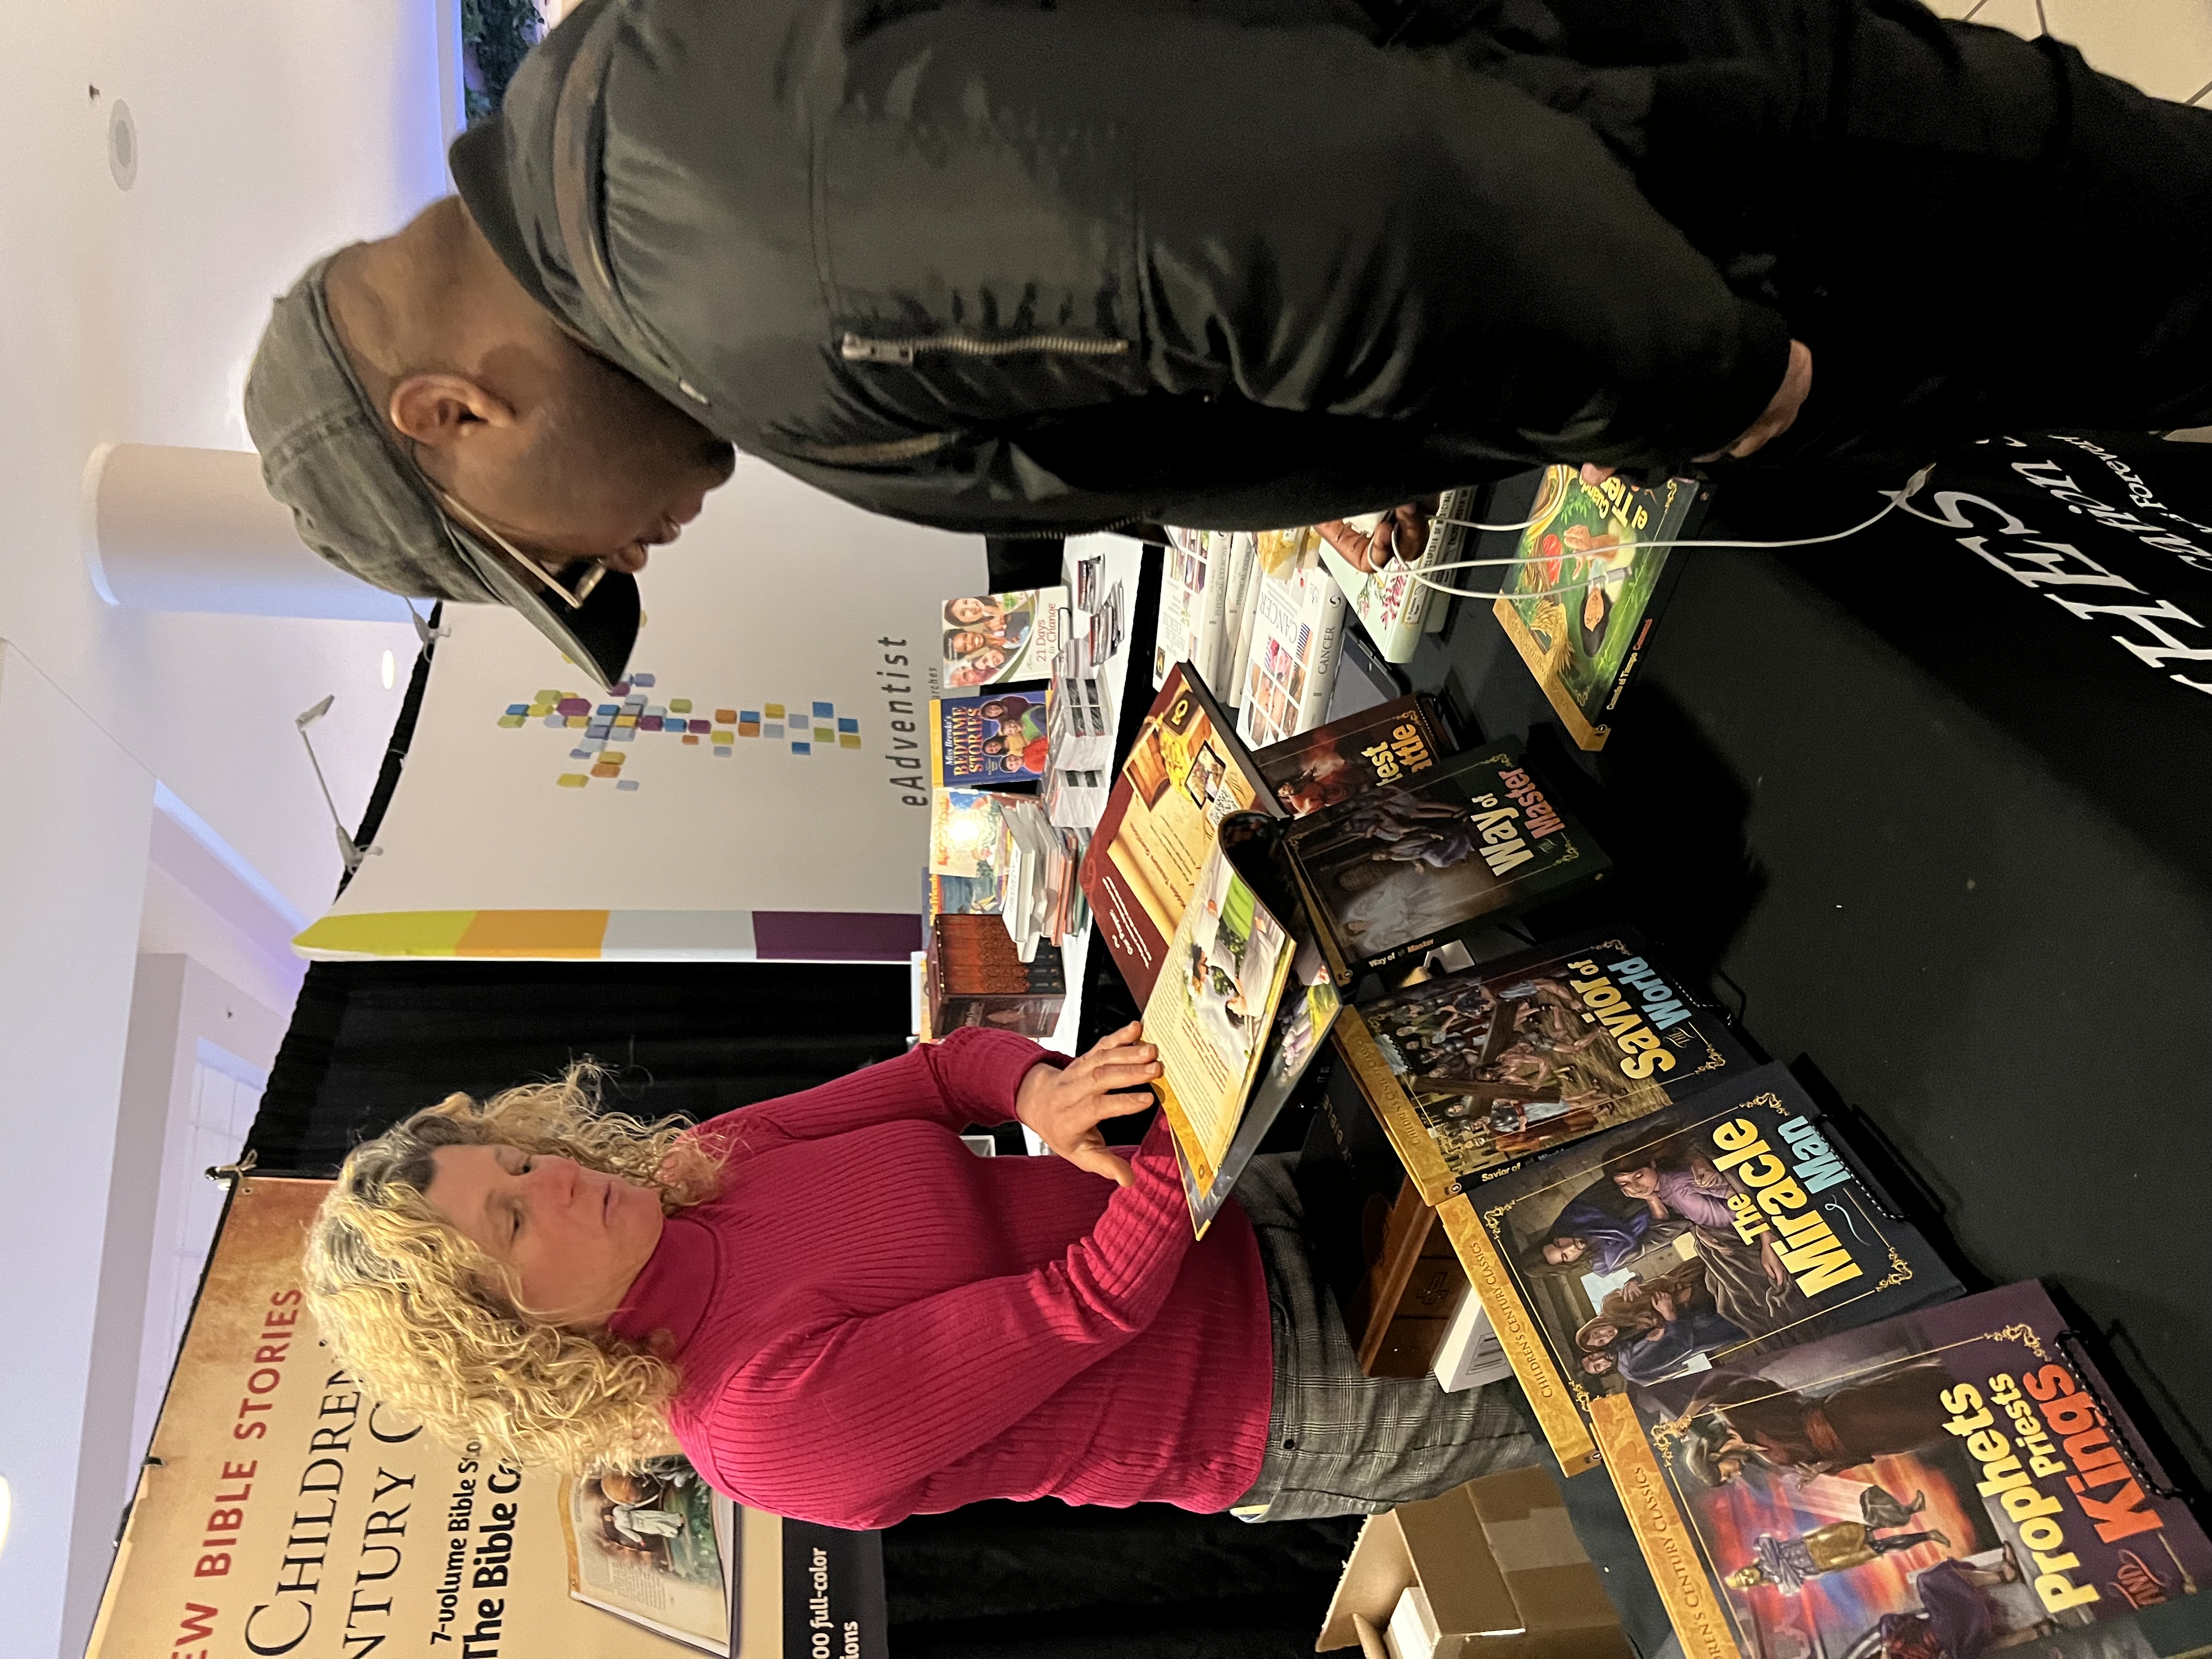 Tammy Mapes, a literature evangelist, engages with a potential customer in the exhibit hall of the North American Division's Adventist Ministries Convention